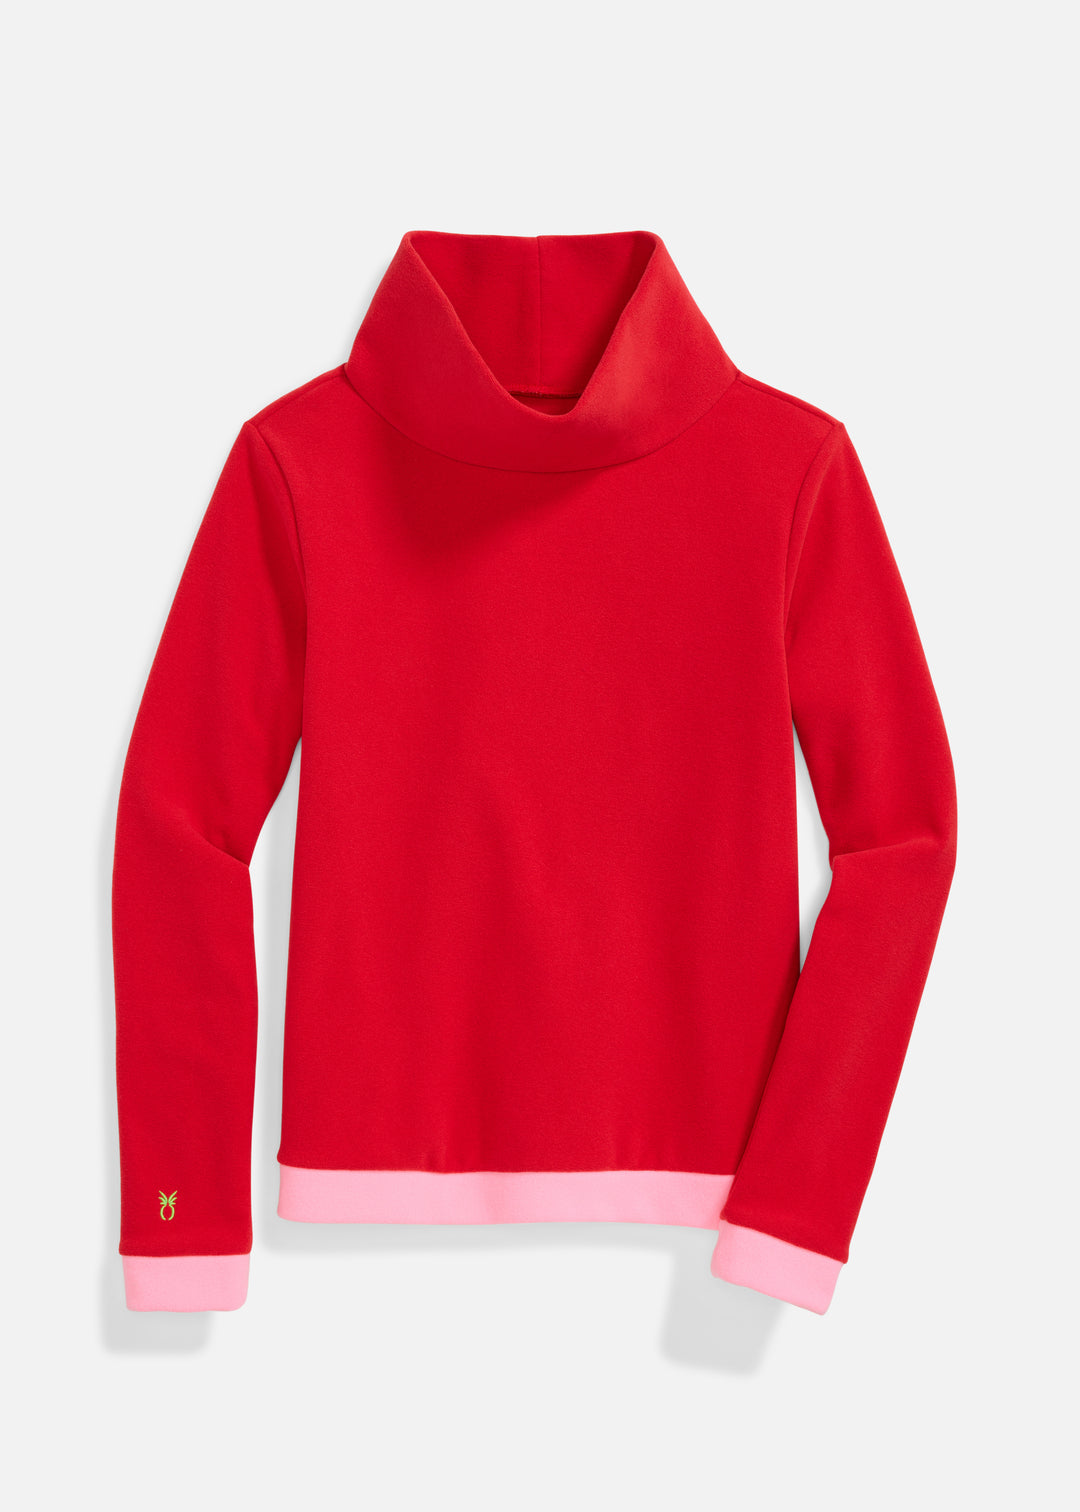 Park Slope Colorblock in Terry Fleece (Red/Cotton Candy)